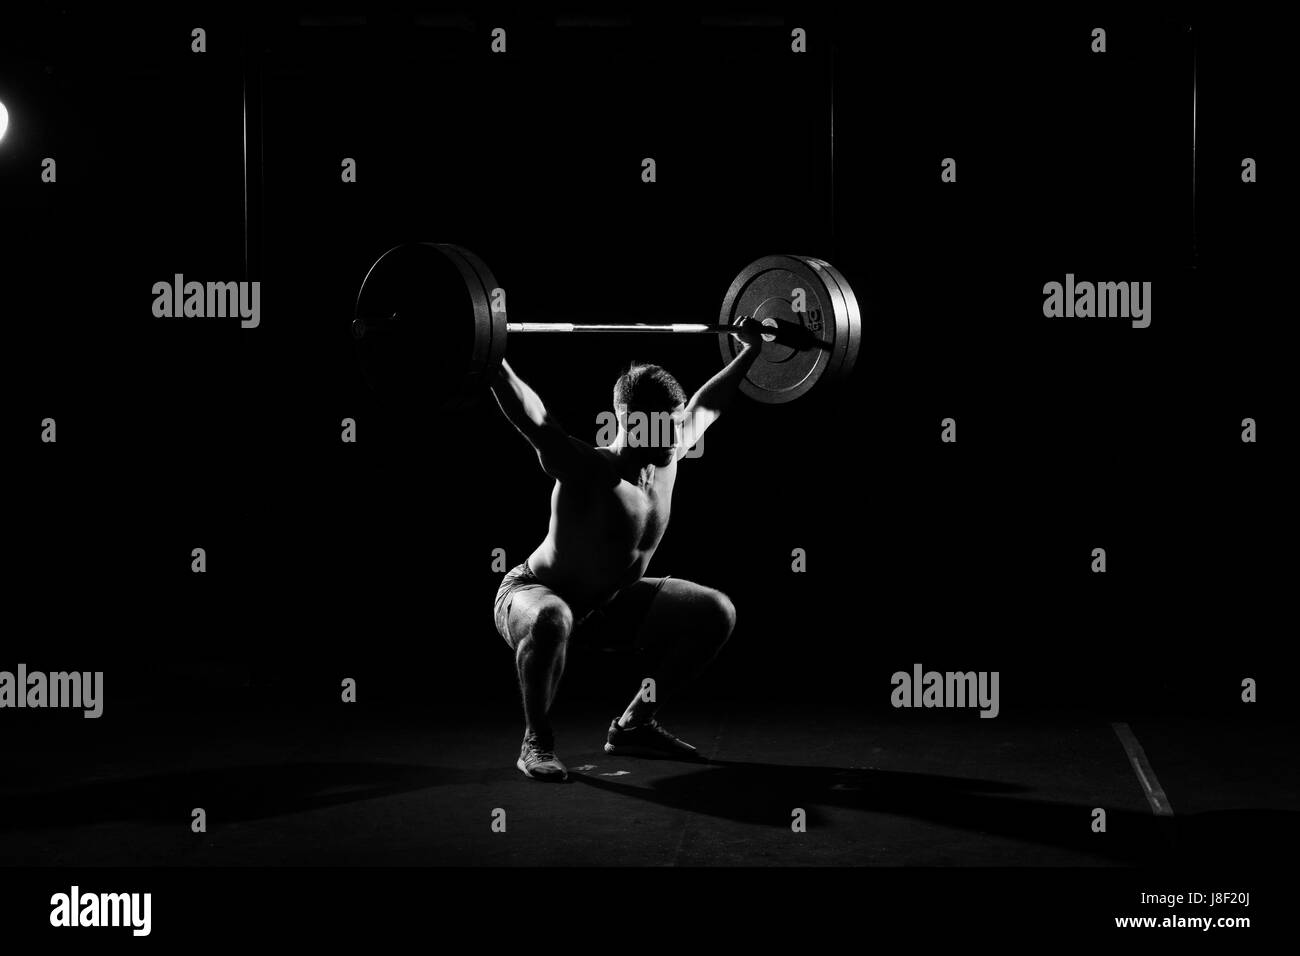 Fitness training. Man doing sit ups exercise with barbell in dark gym. Stock Photo